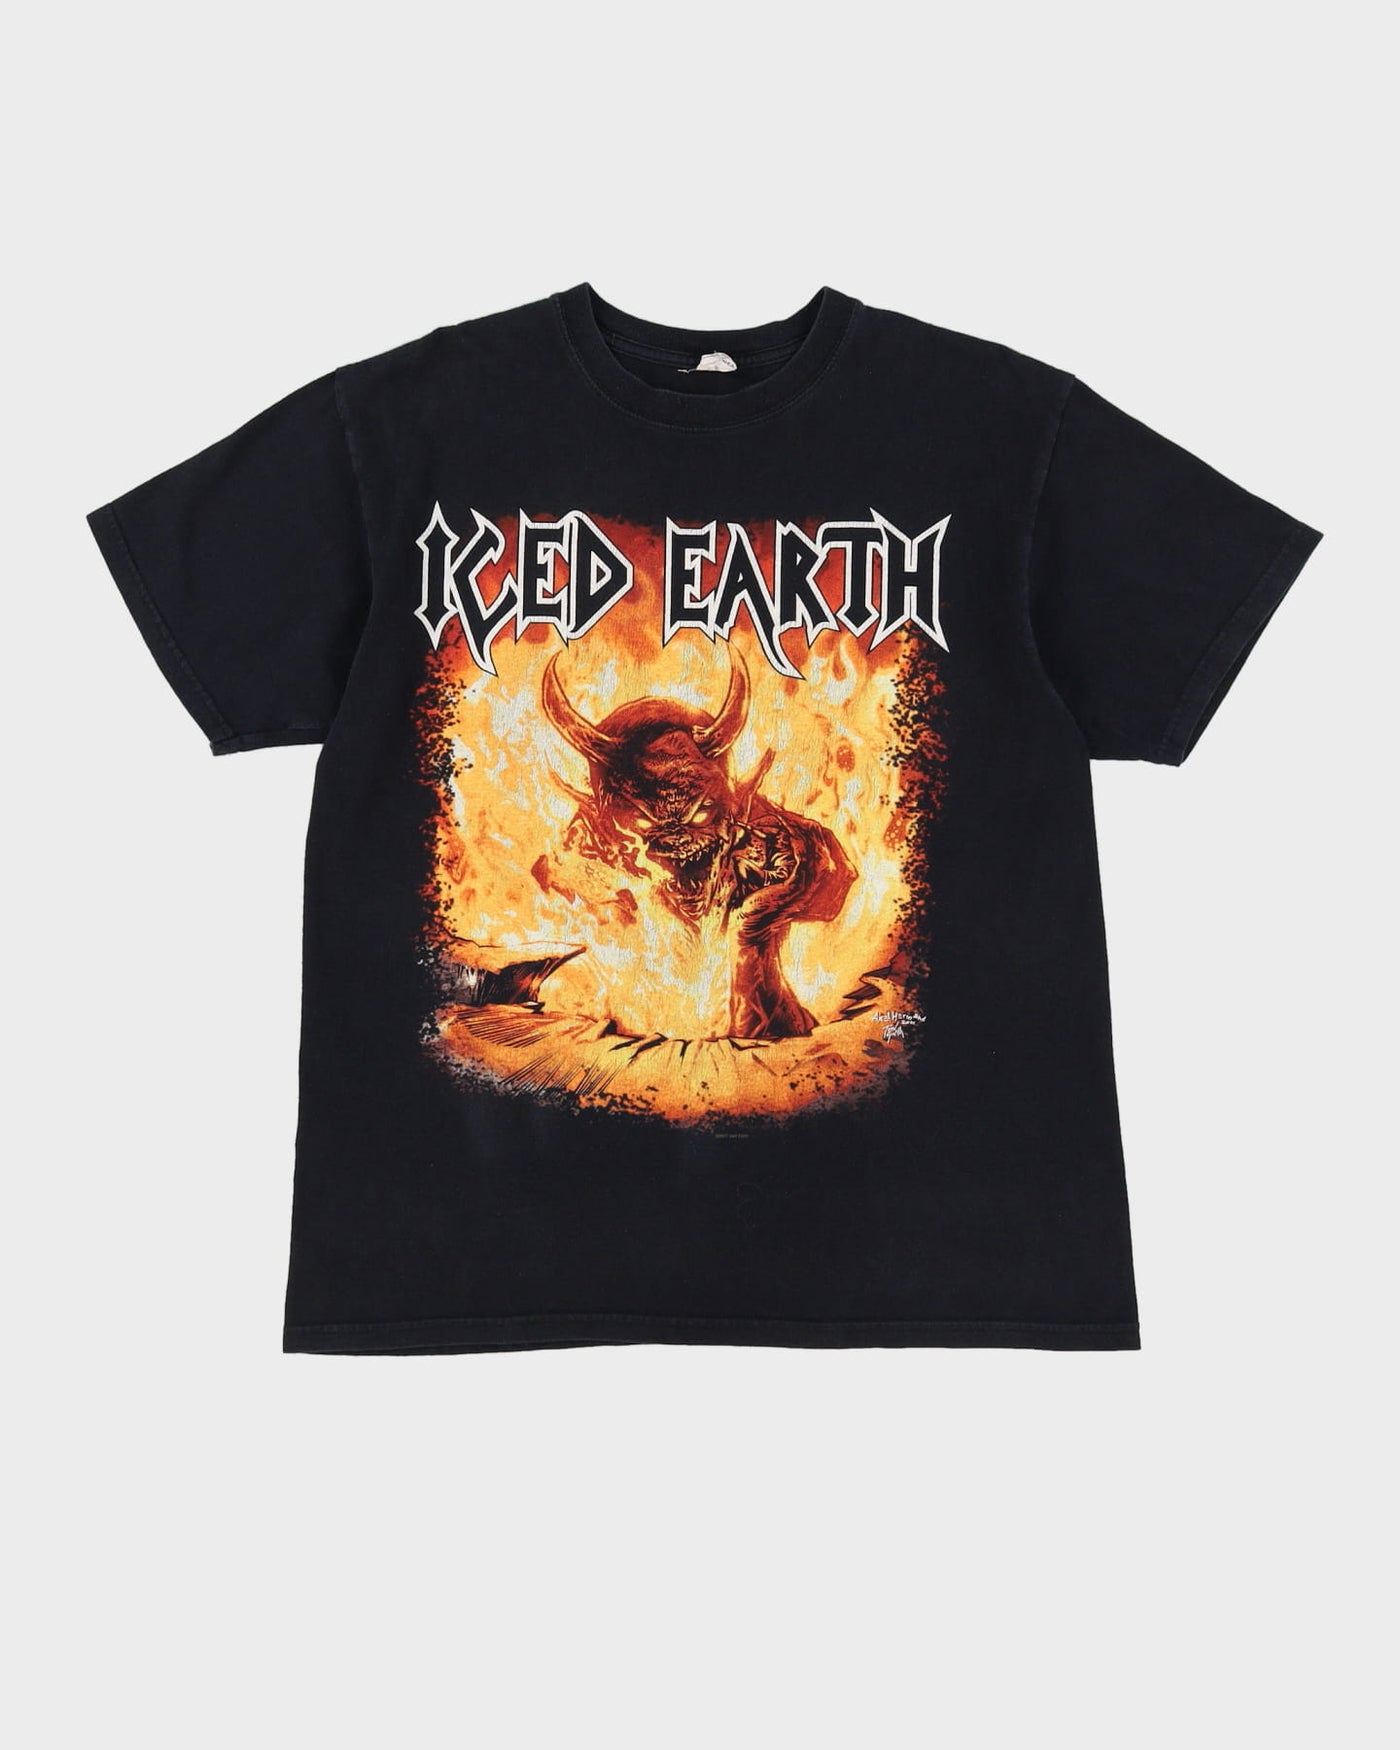 2007 Iced Earth Burnt Offerings Black Graphic Metal Band T-Shirt - L